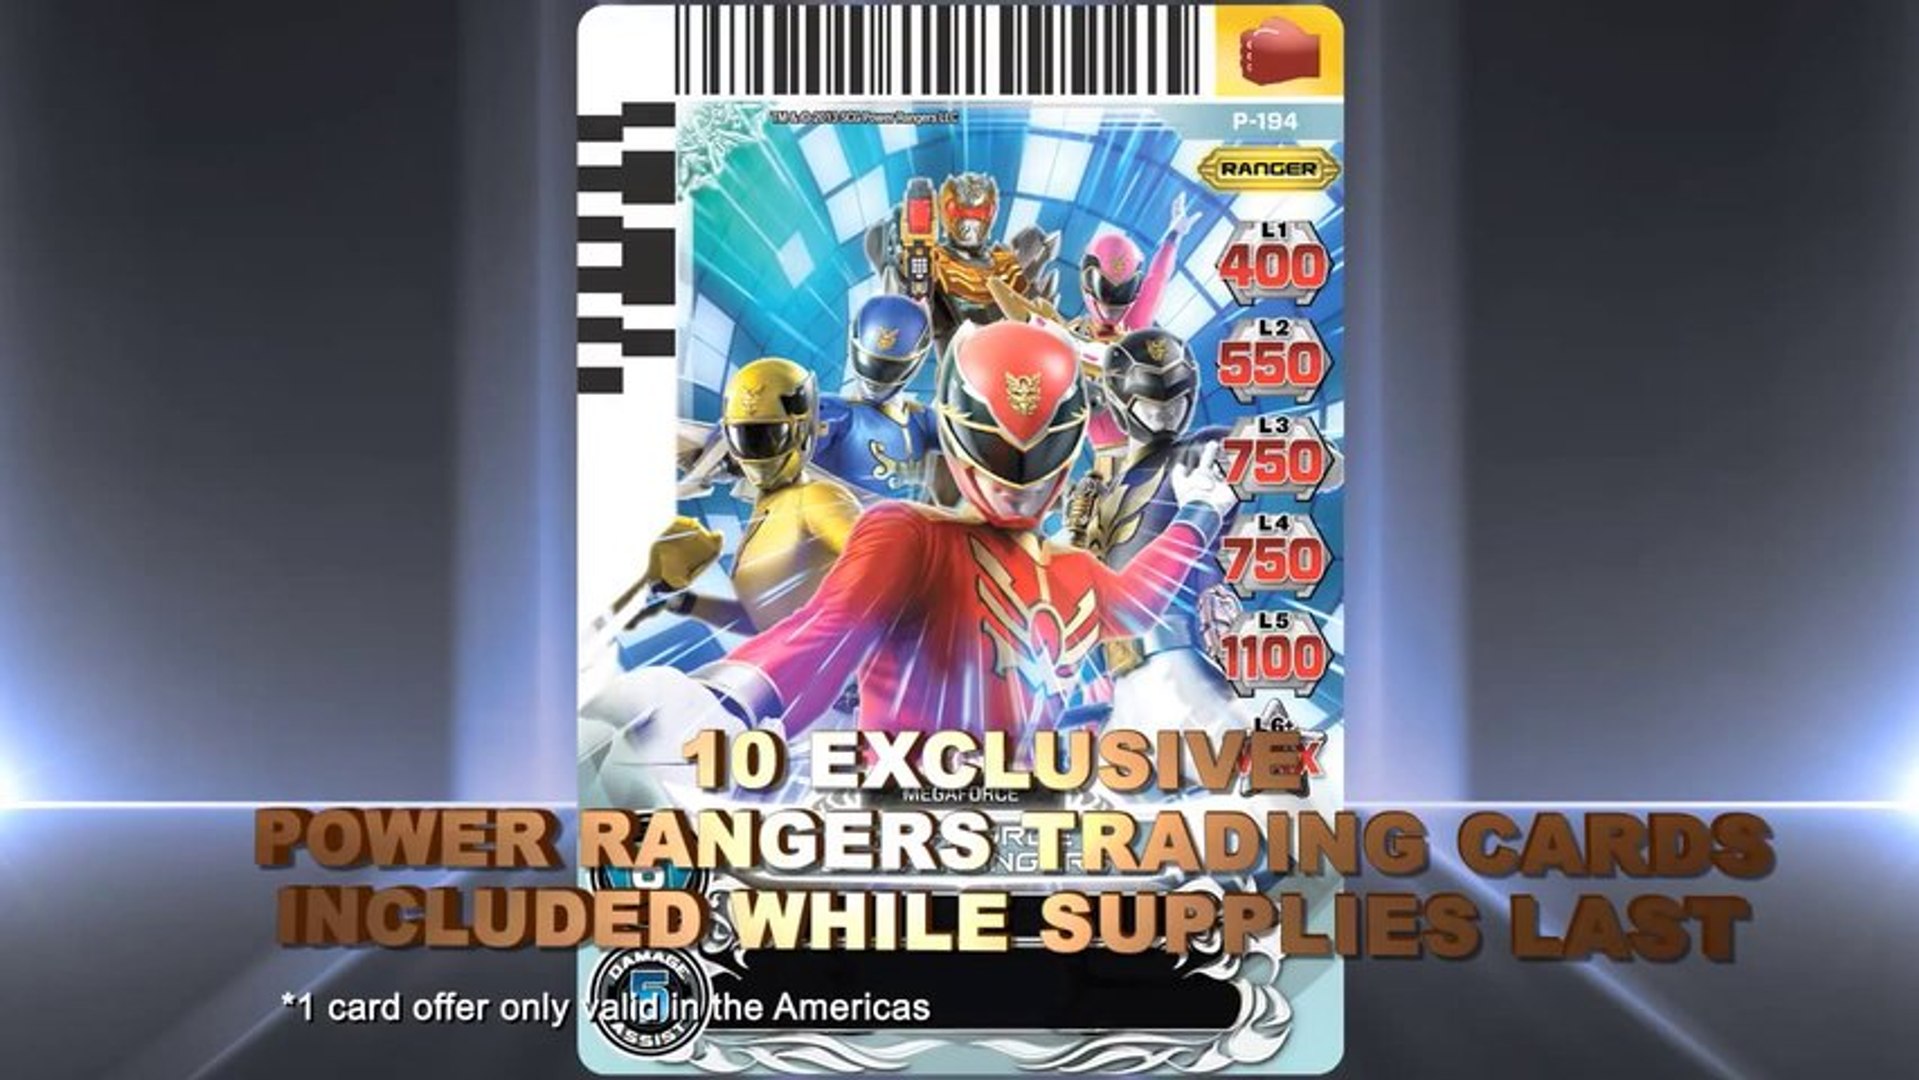 Power Rangers Megaforce - 3DS - Scan to power up! (EnglishTrailer) - video  Dailymotion